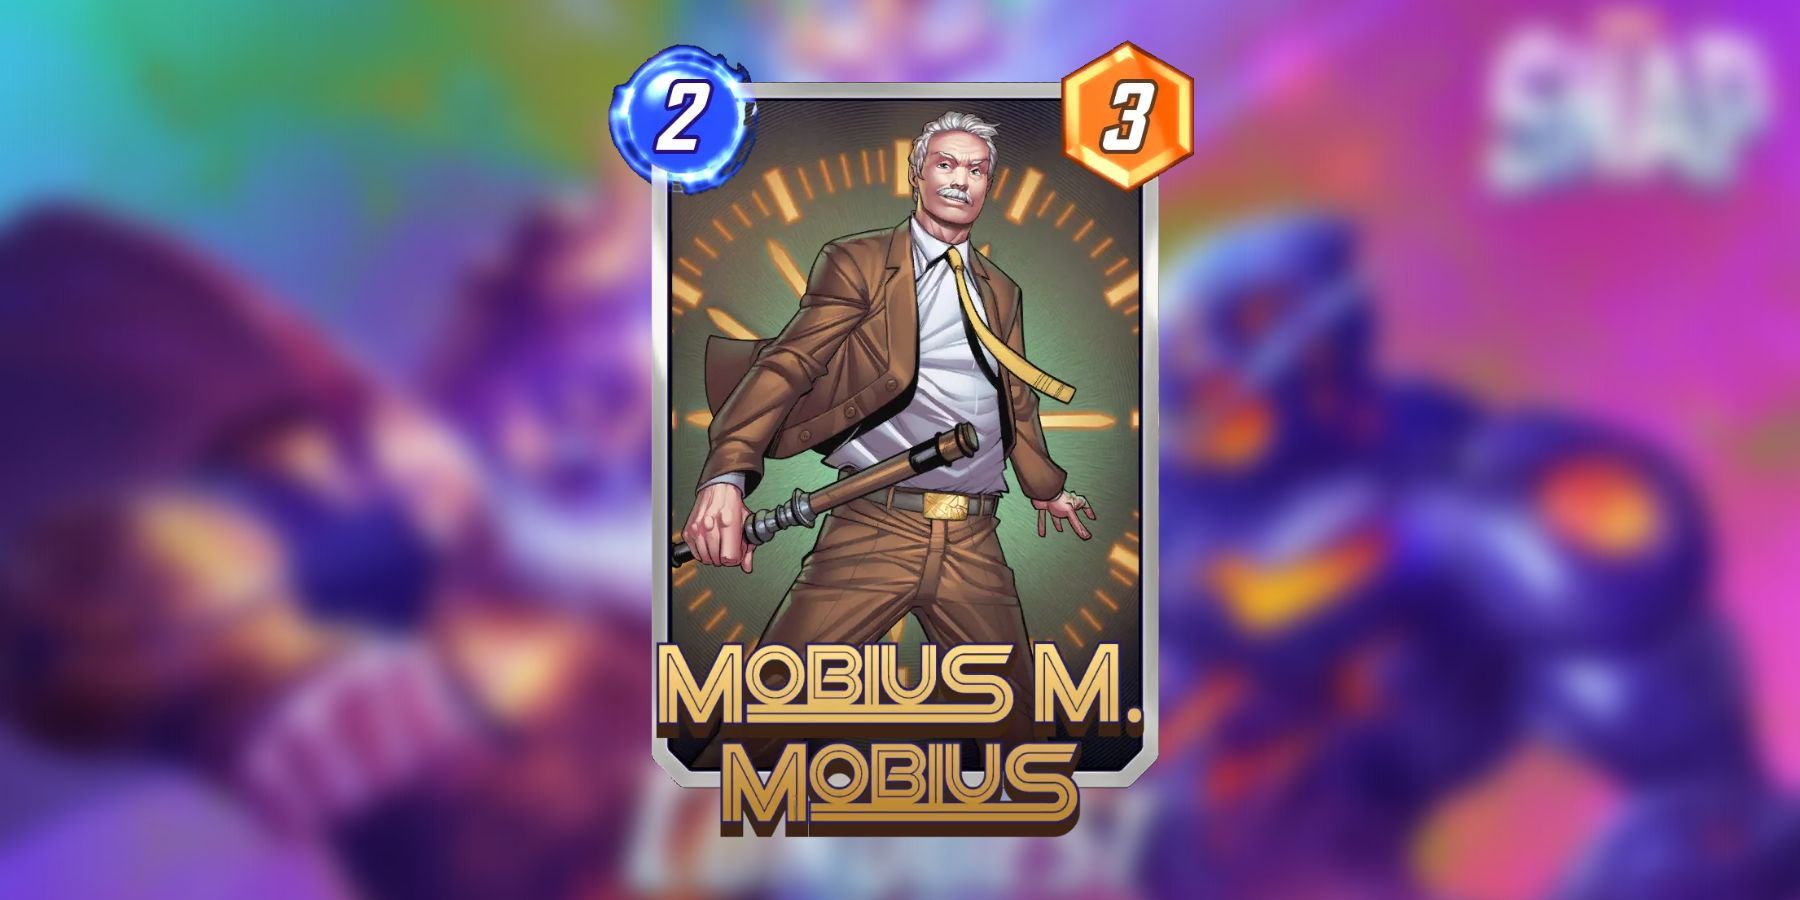 image showing the mobius m. mobius card in marvel snap.